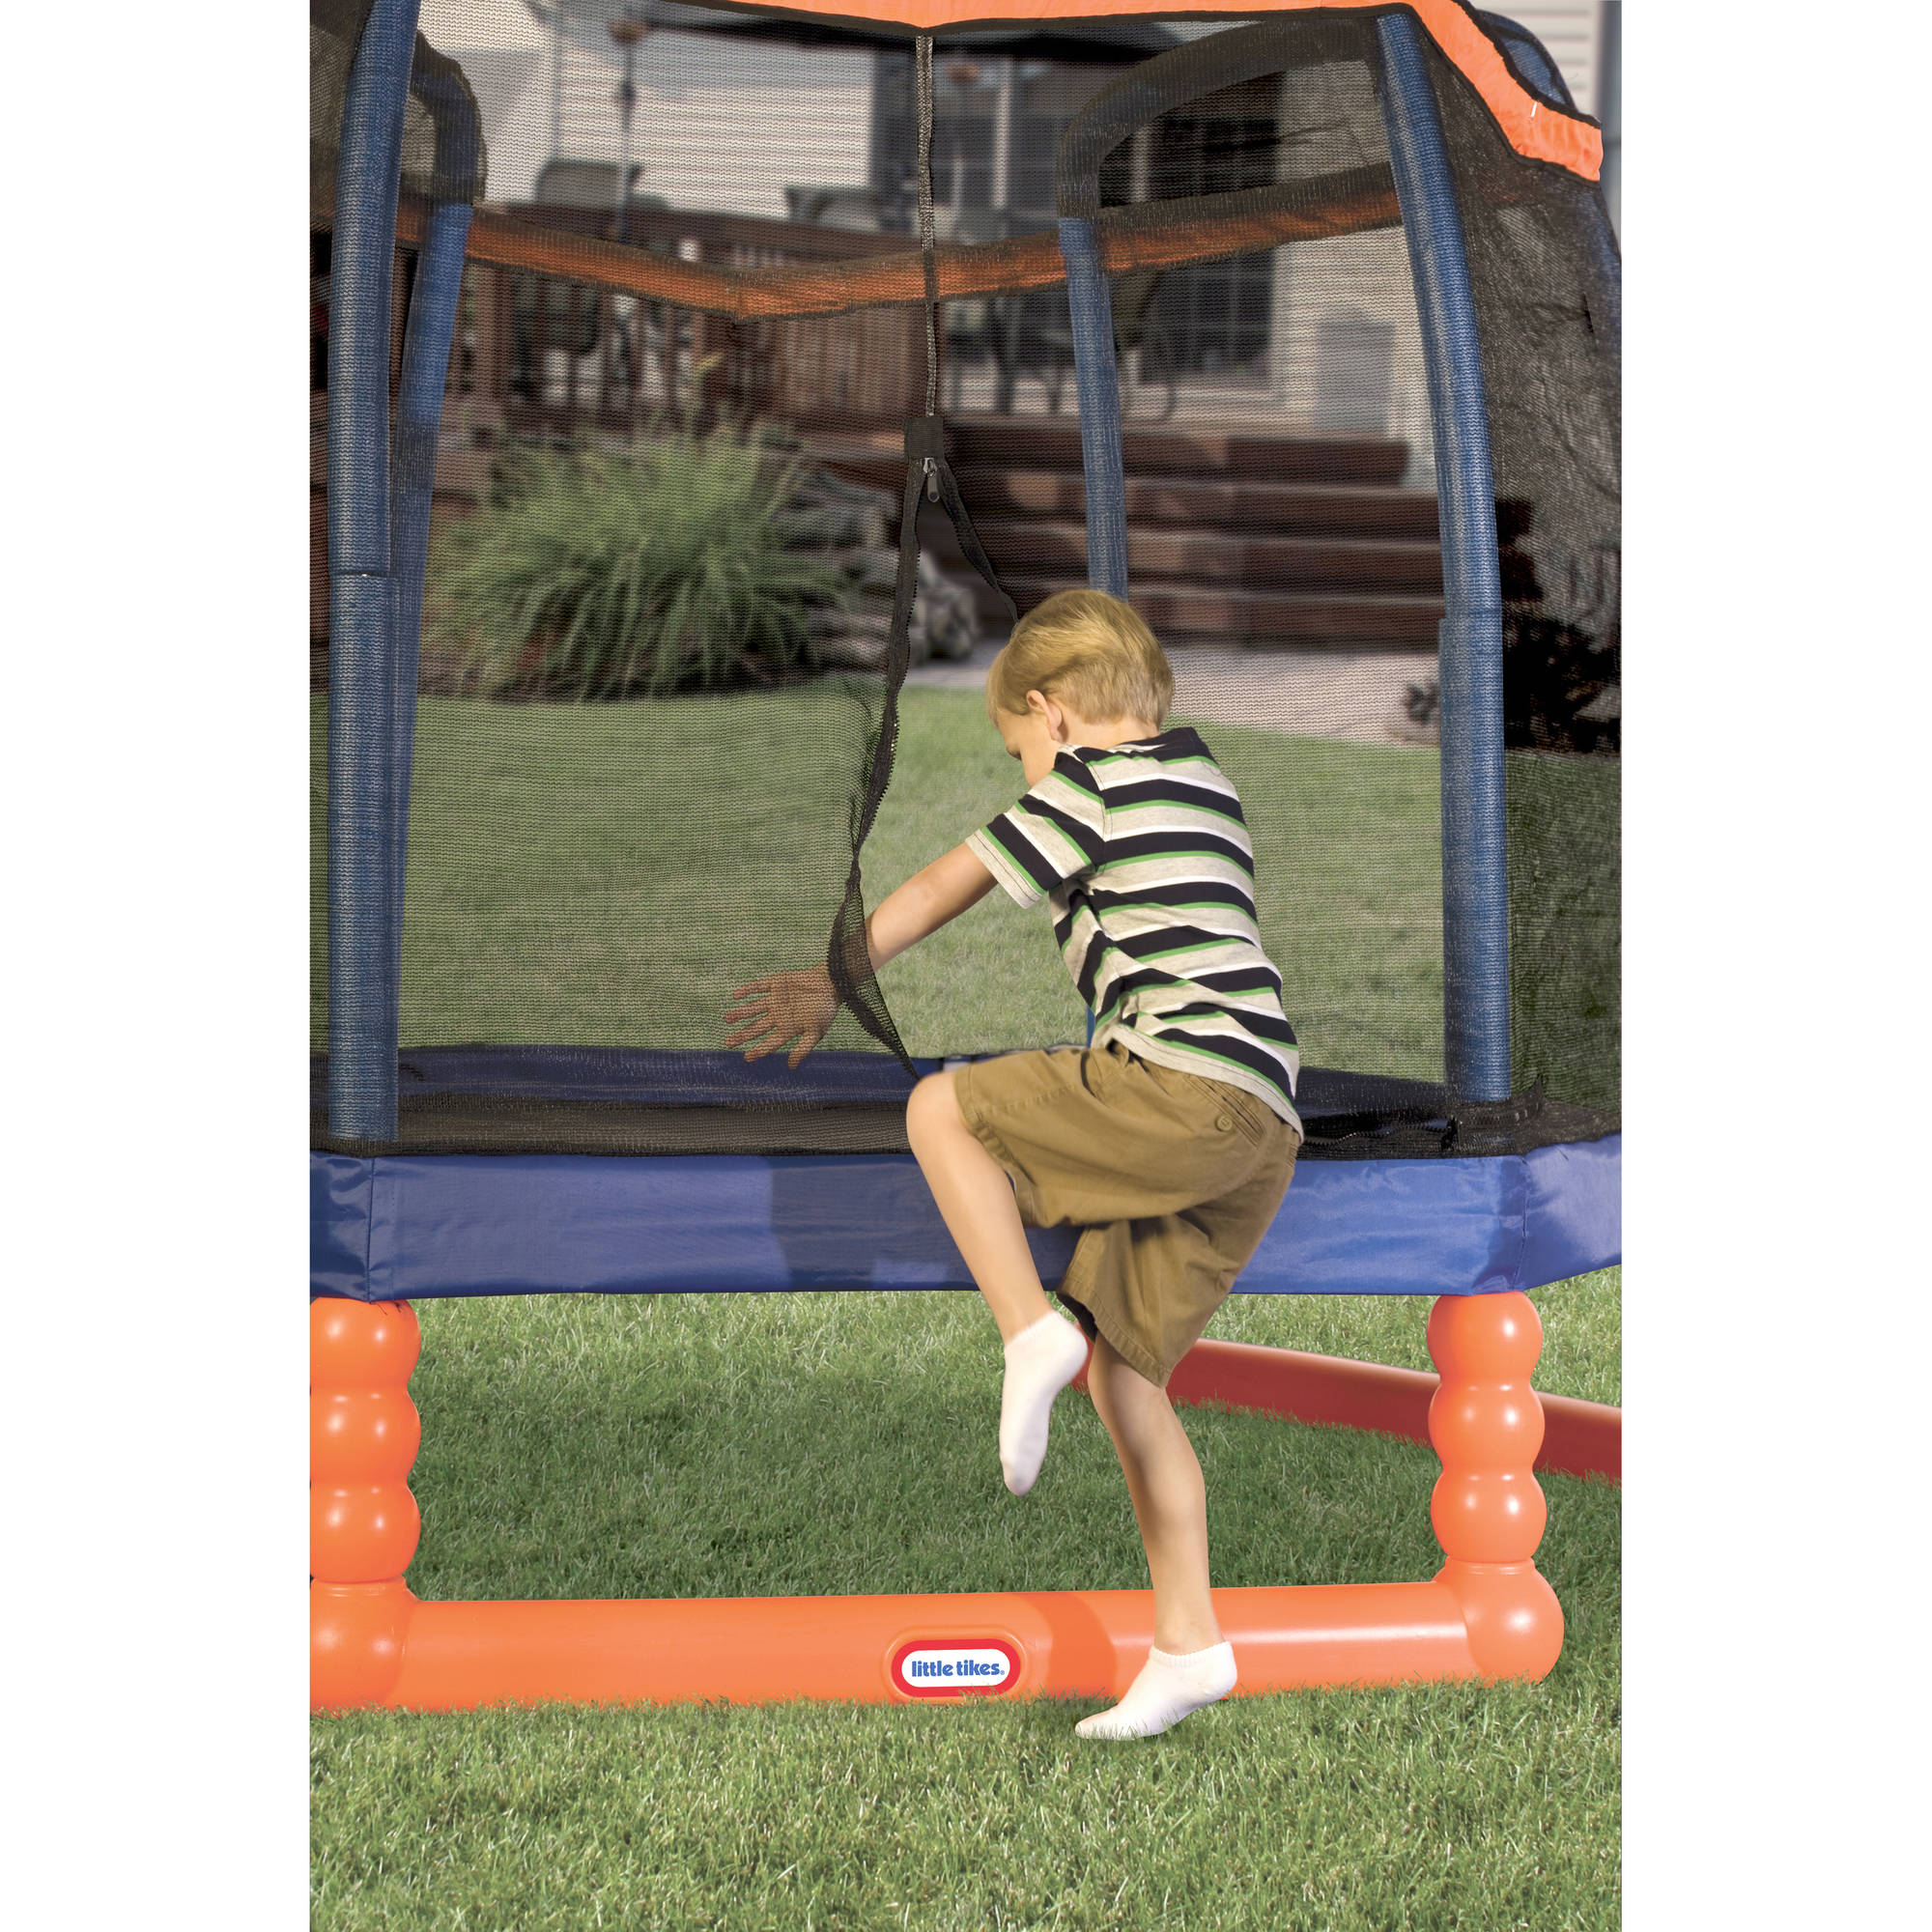 Little Tikes 7-Foot Trampoline, with Enclosure, Blue/Orange - image 4 of 6